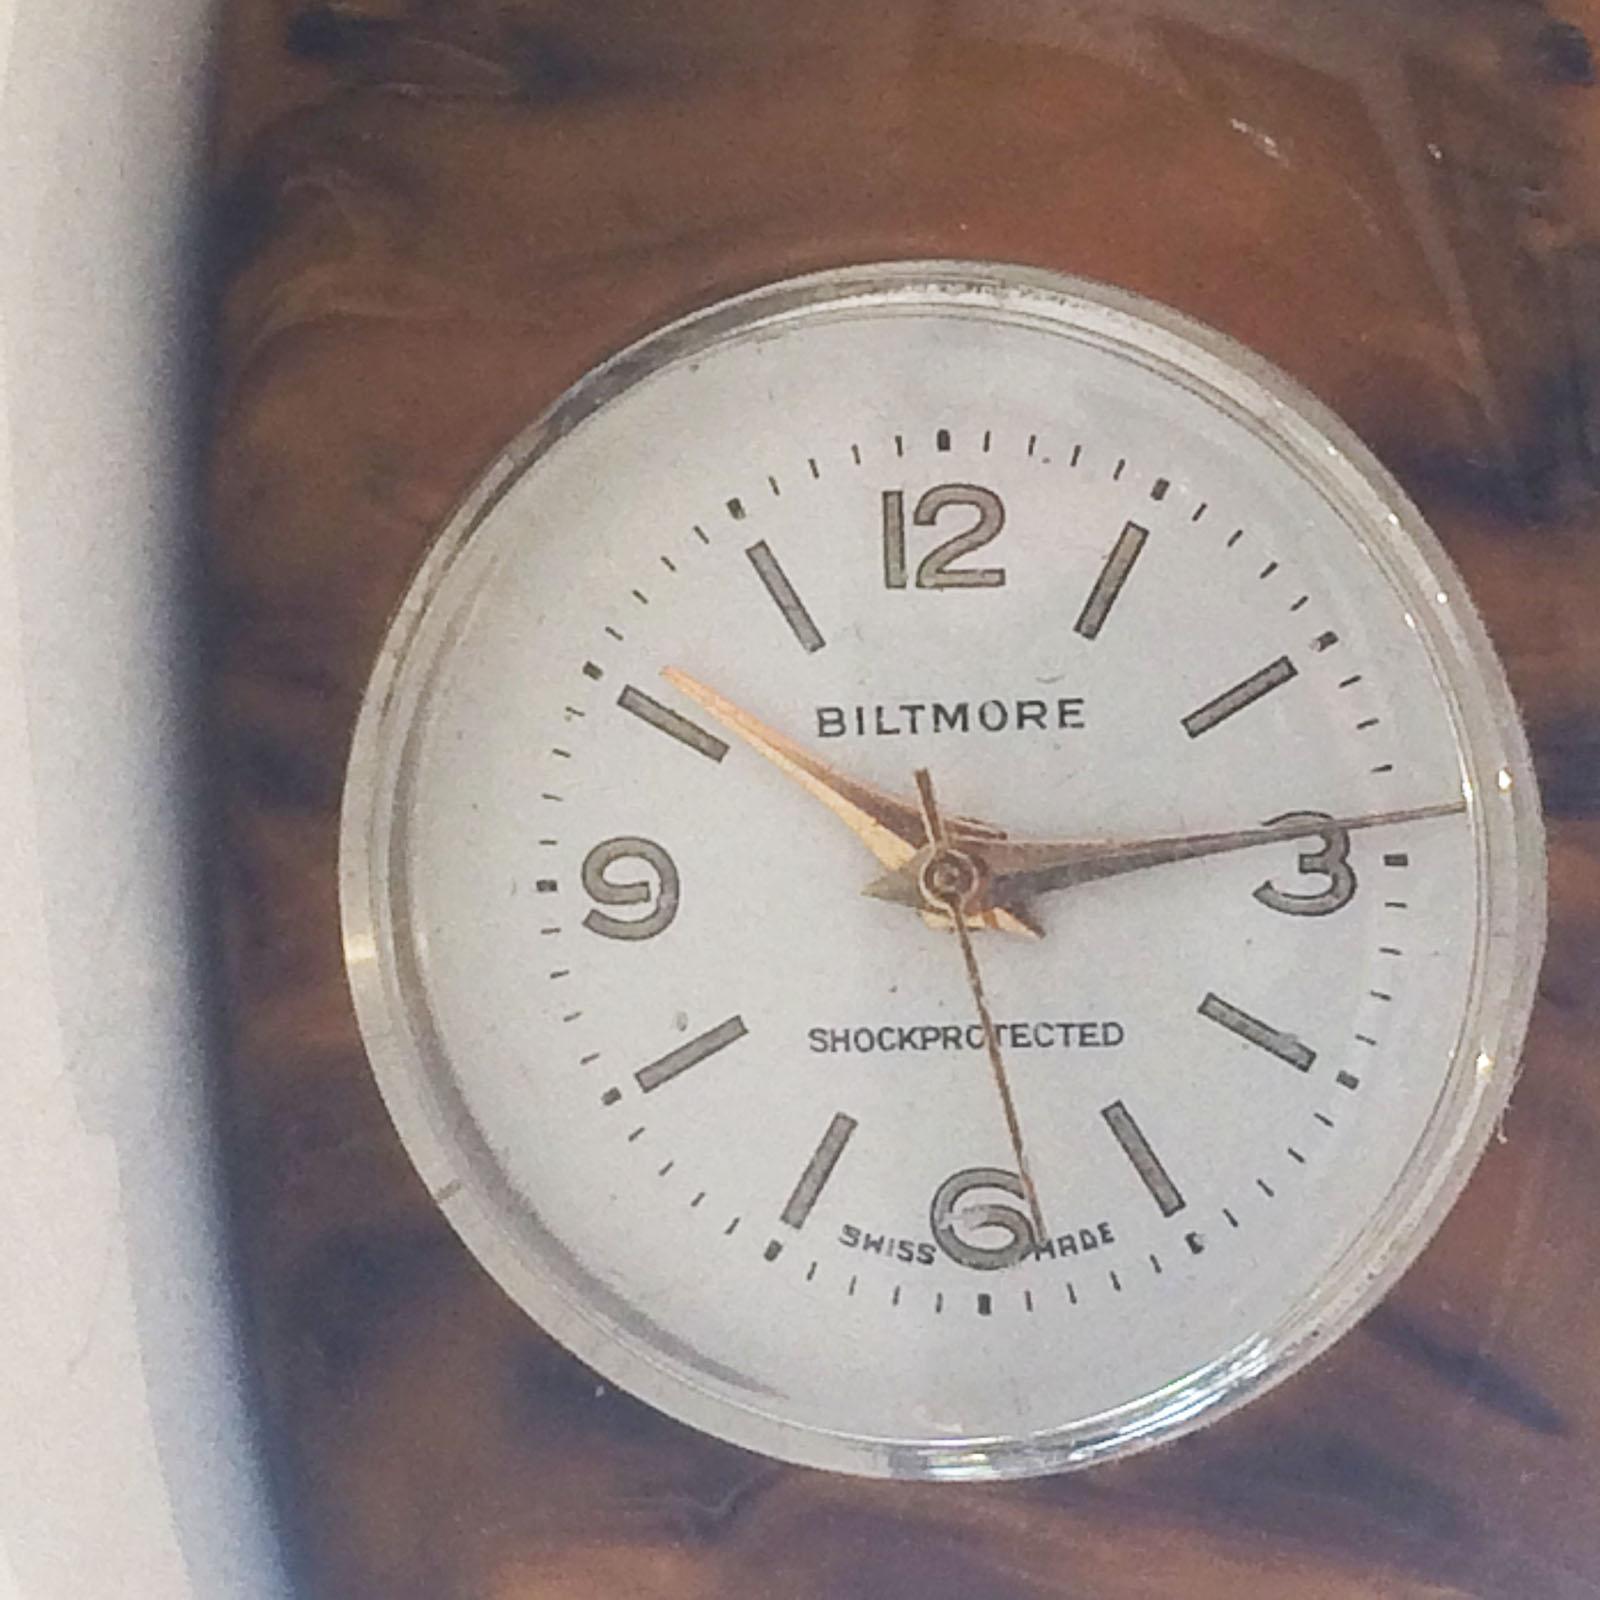 American Bakelite Watch in Rare colour called Mississippi Mud. All perfect condition, with gilt Crown no wear and very soft, aged patina to rear gilt hinge  which still works as new. Excellent condition and keeps good time. Gilt Hour, Minute, and